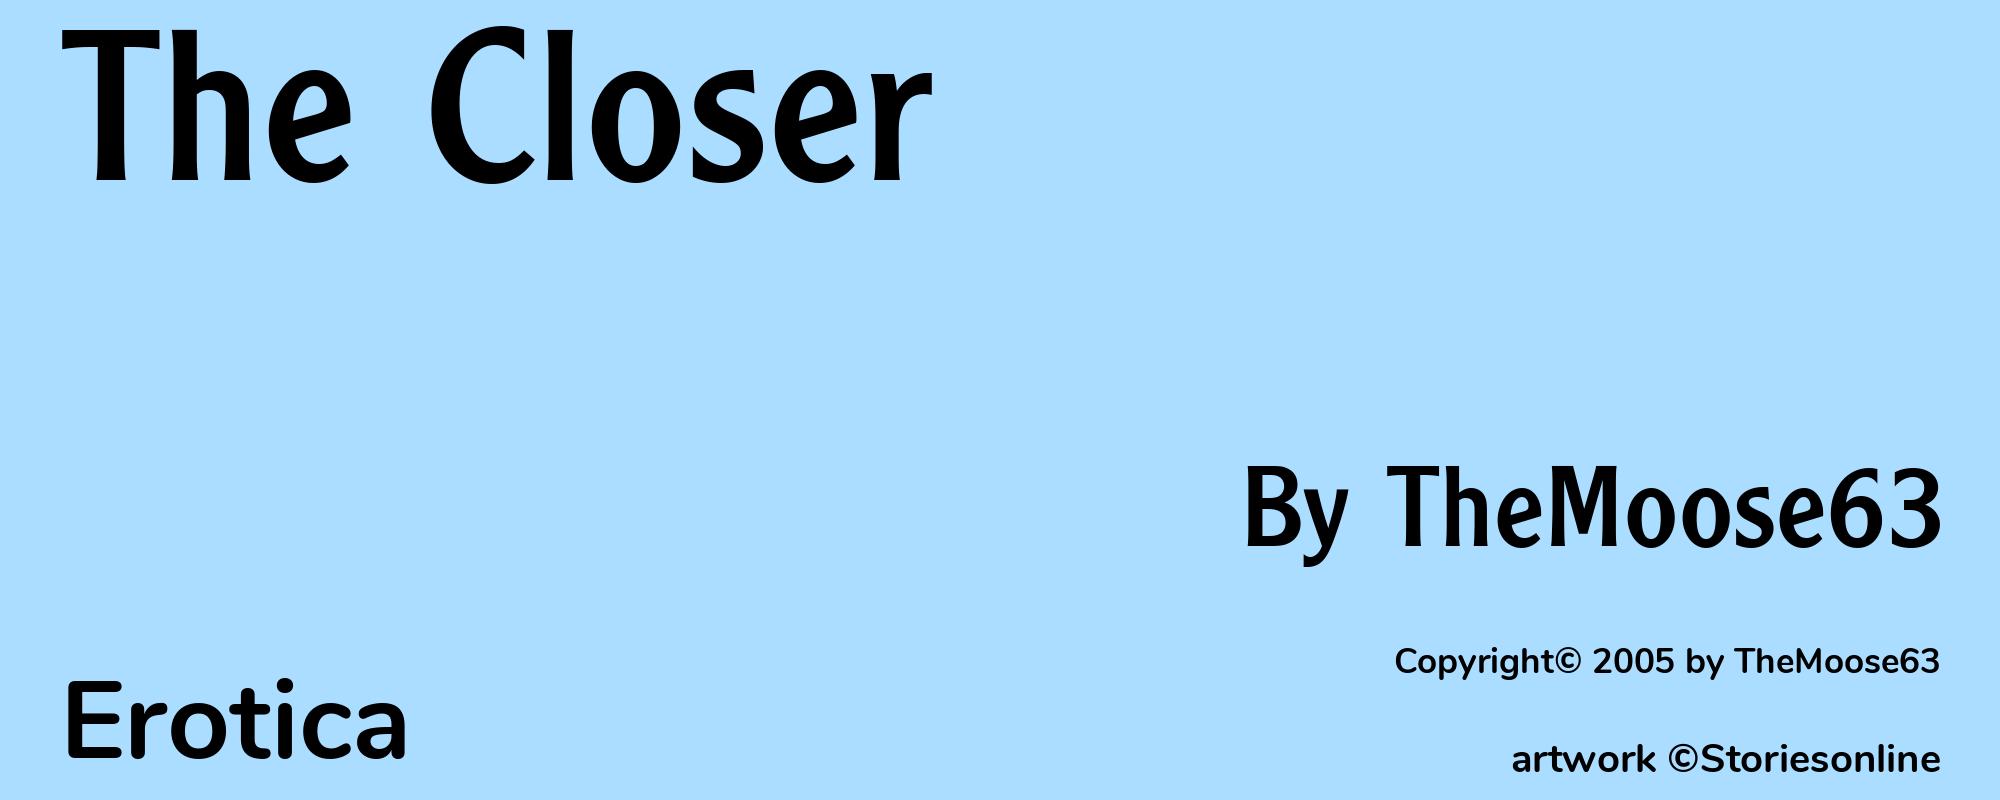 The Closer - Cover